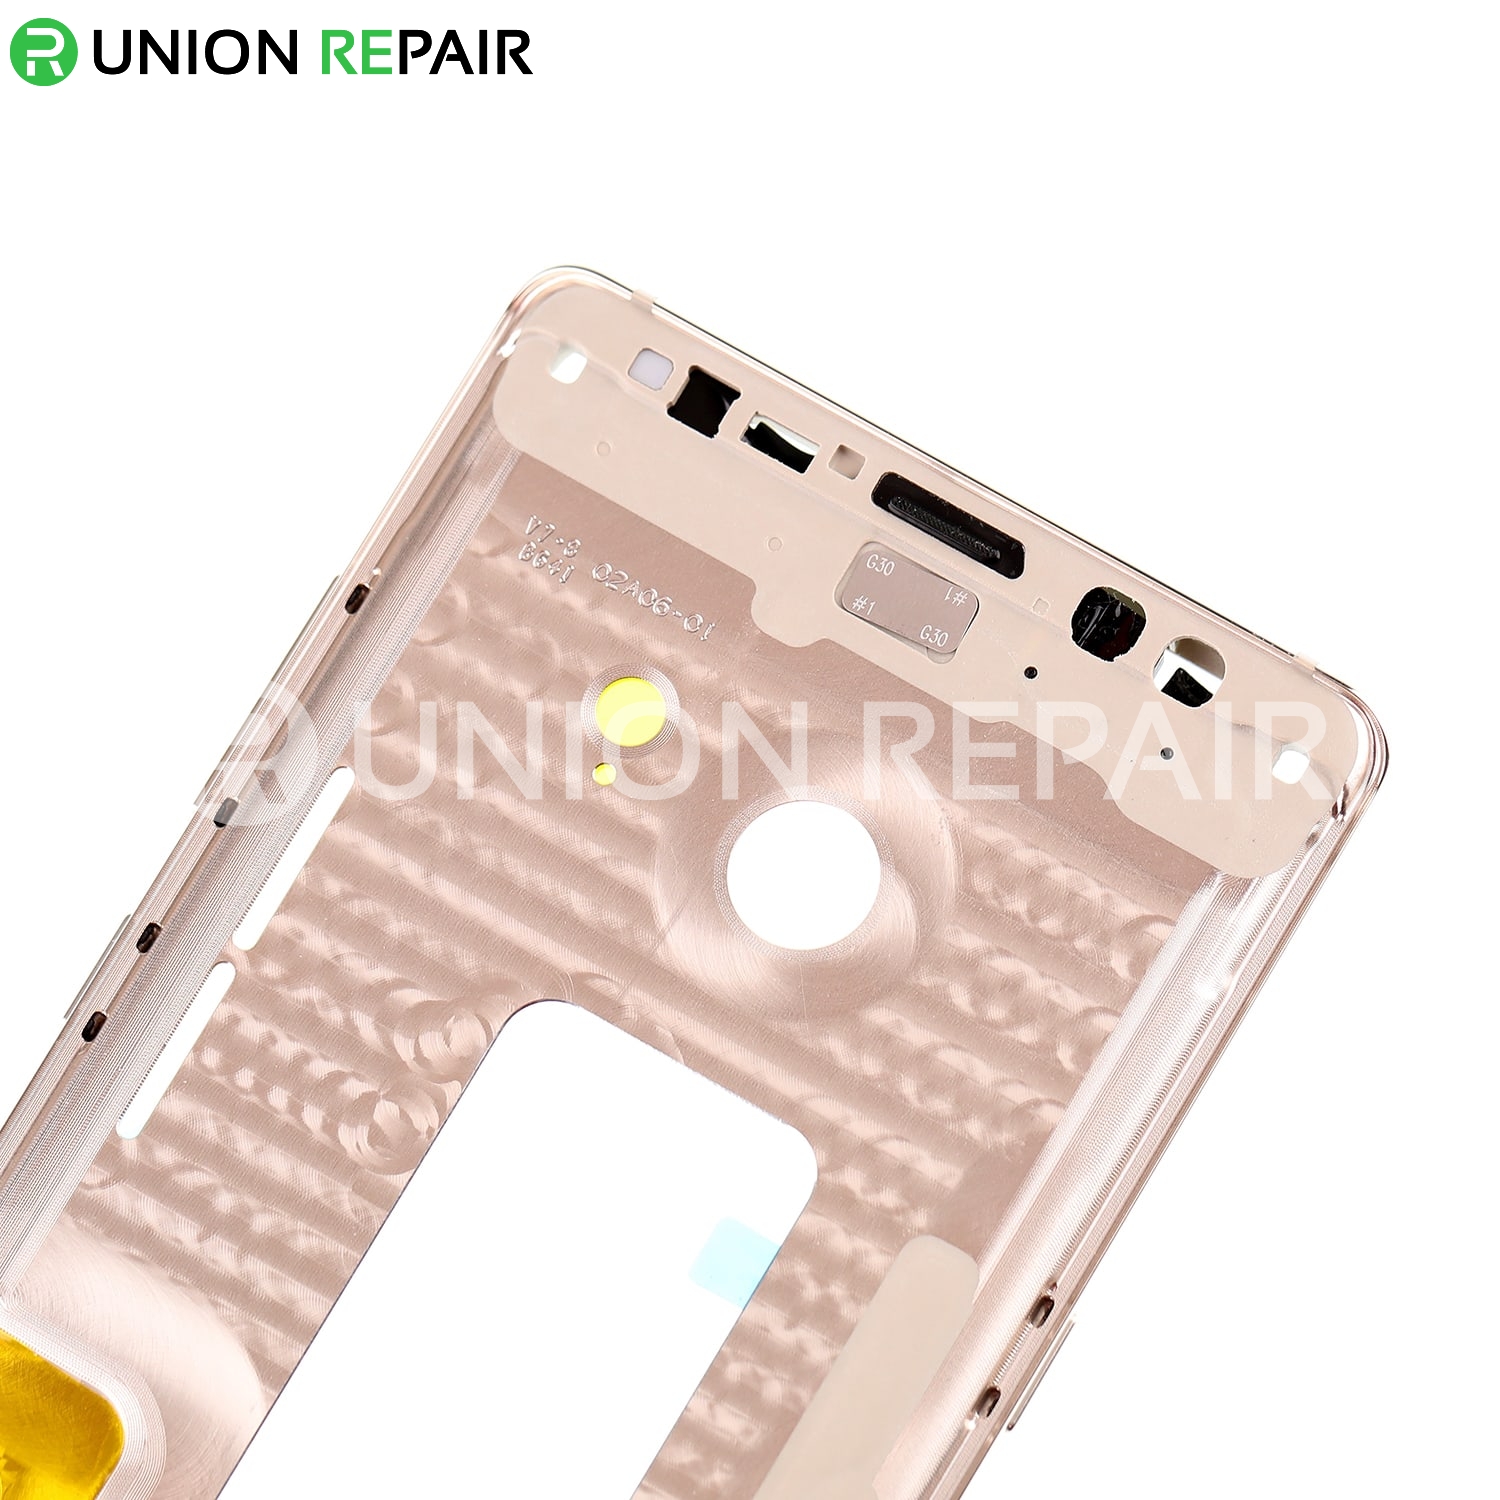 Replacement for Samsung Galaxy Note 8 SM-N950 Rear Housing Frame - Gold